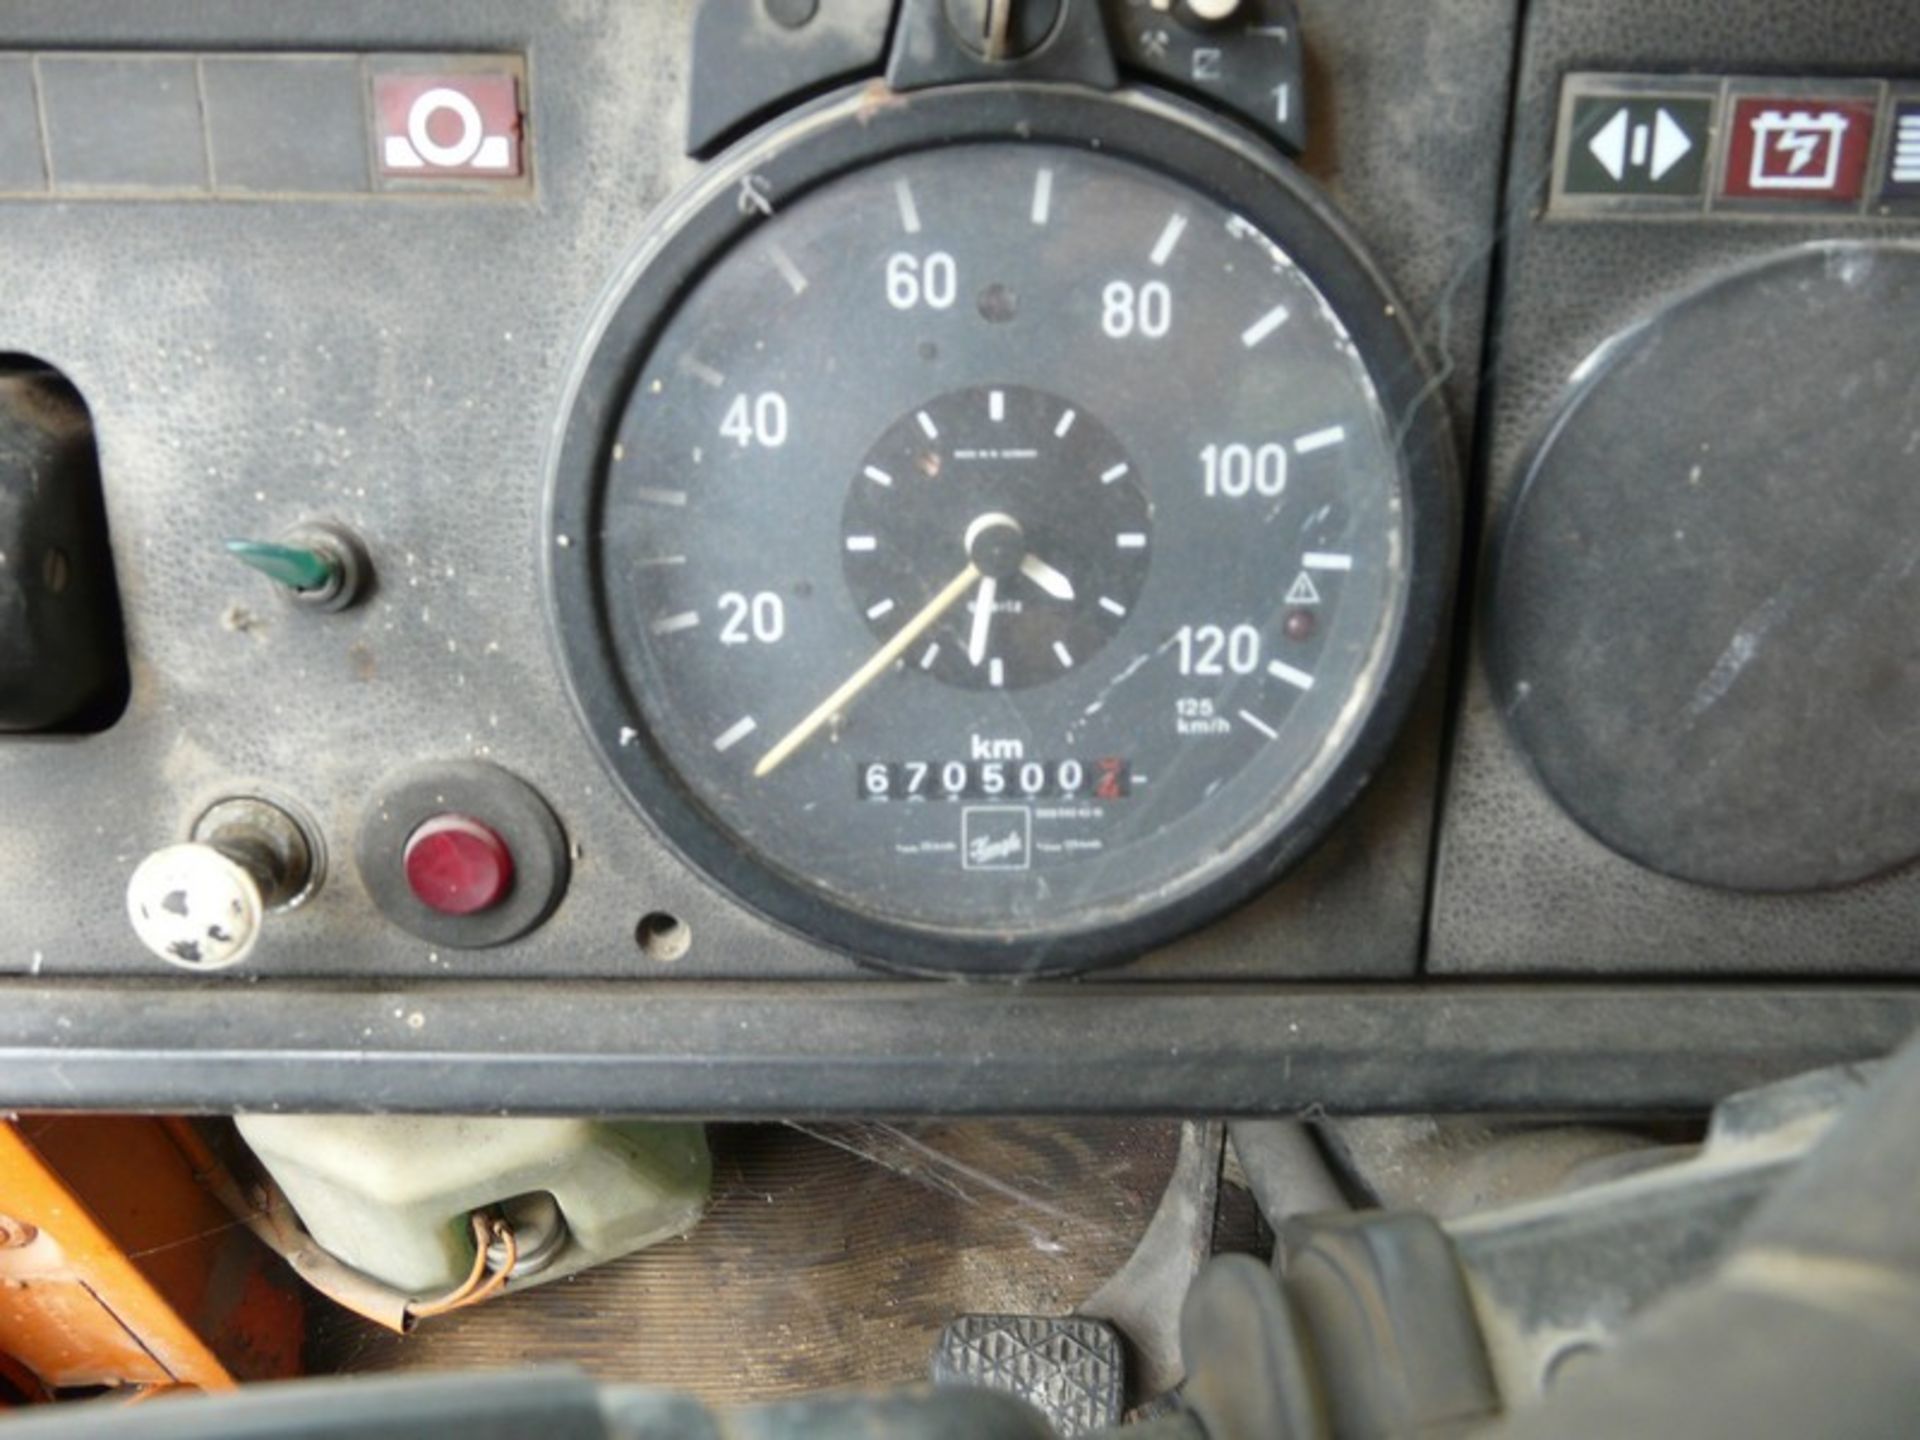 MERCEDES LP 813, REG NAI 2361, KM 670500, Service Book Available, Year: 1986 (Located in Greece - - Image 7 of 10